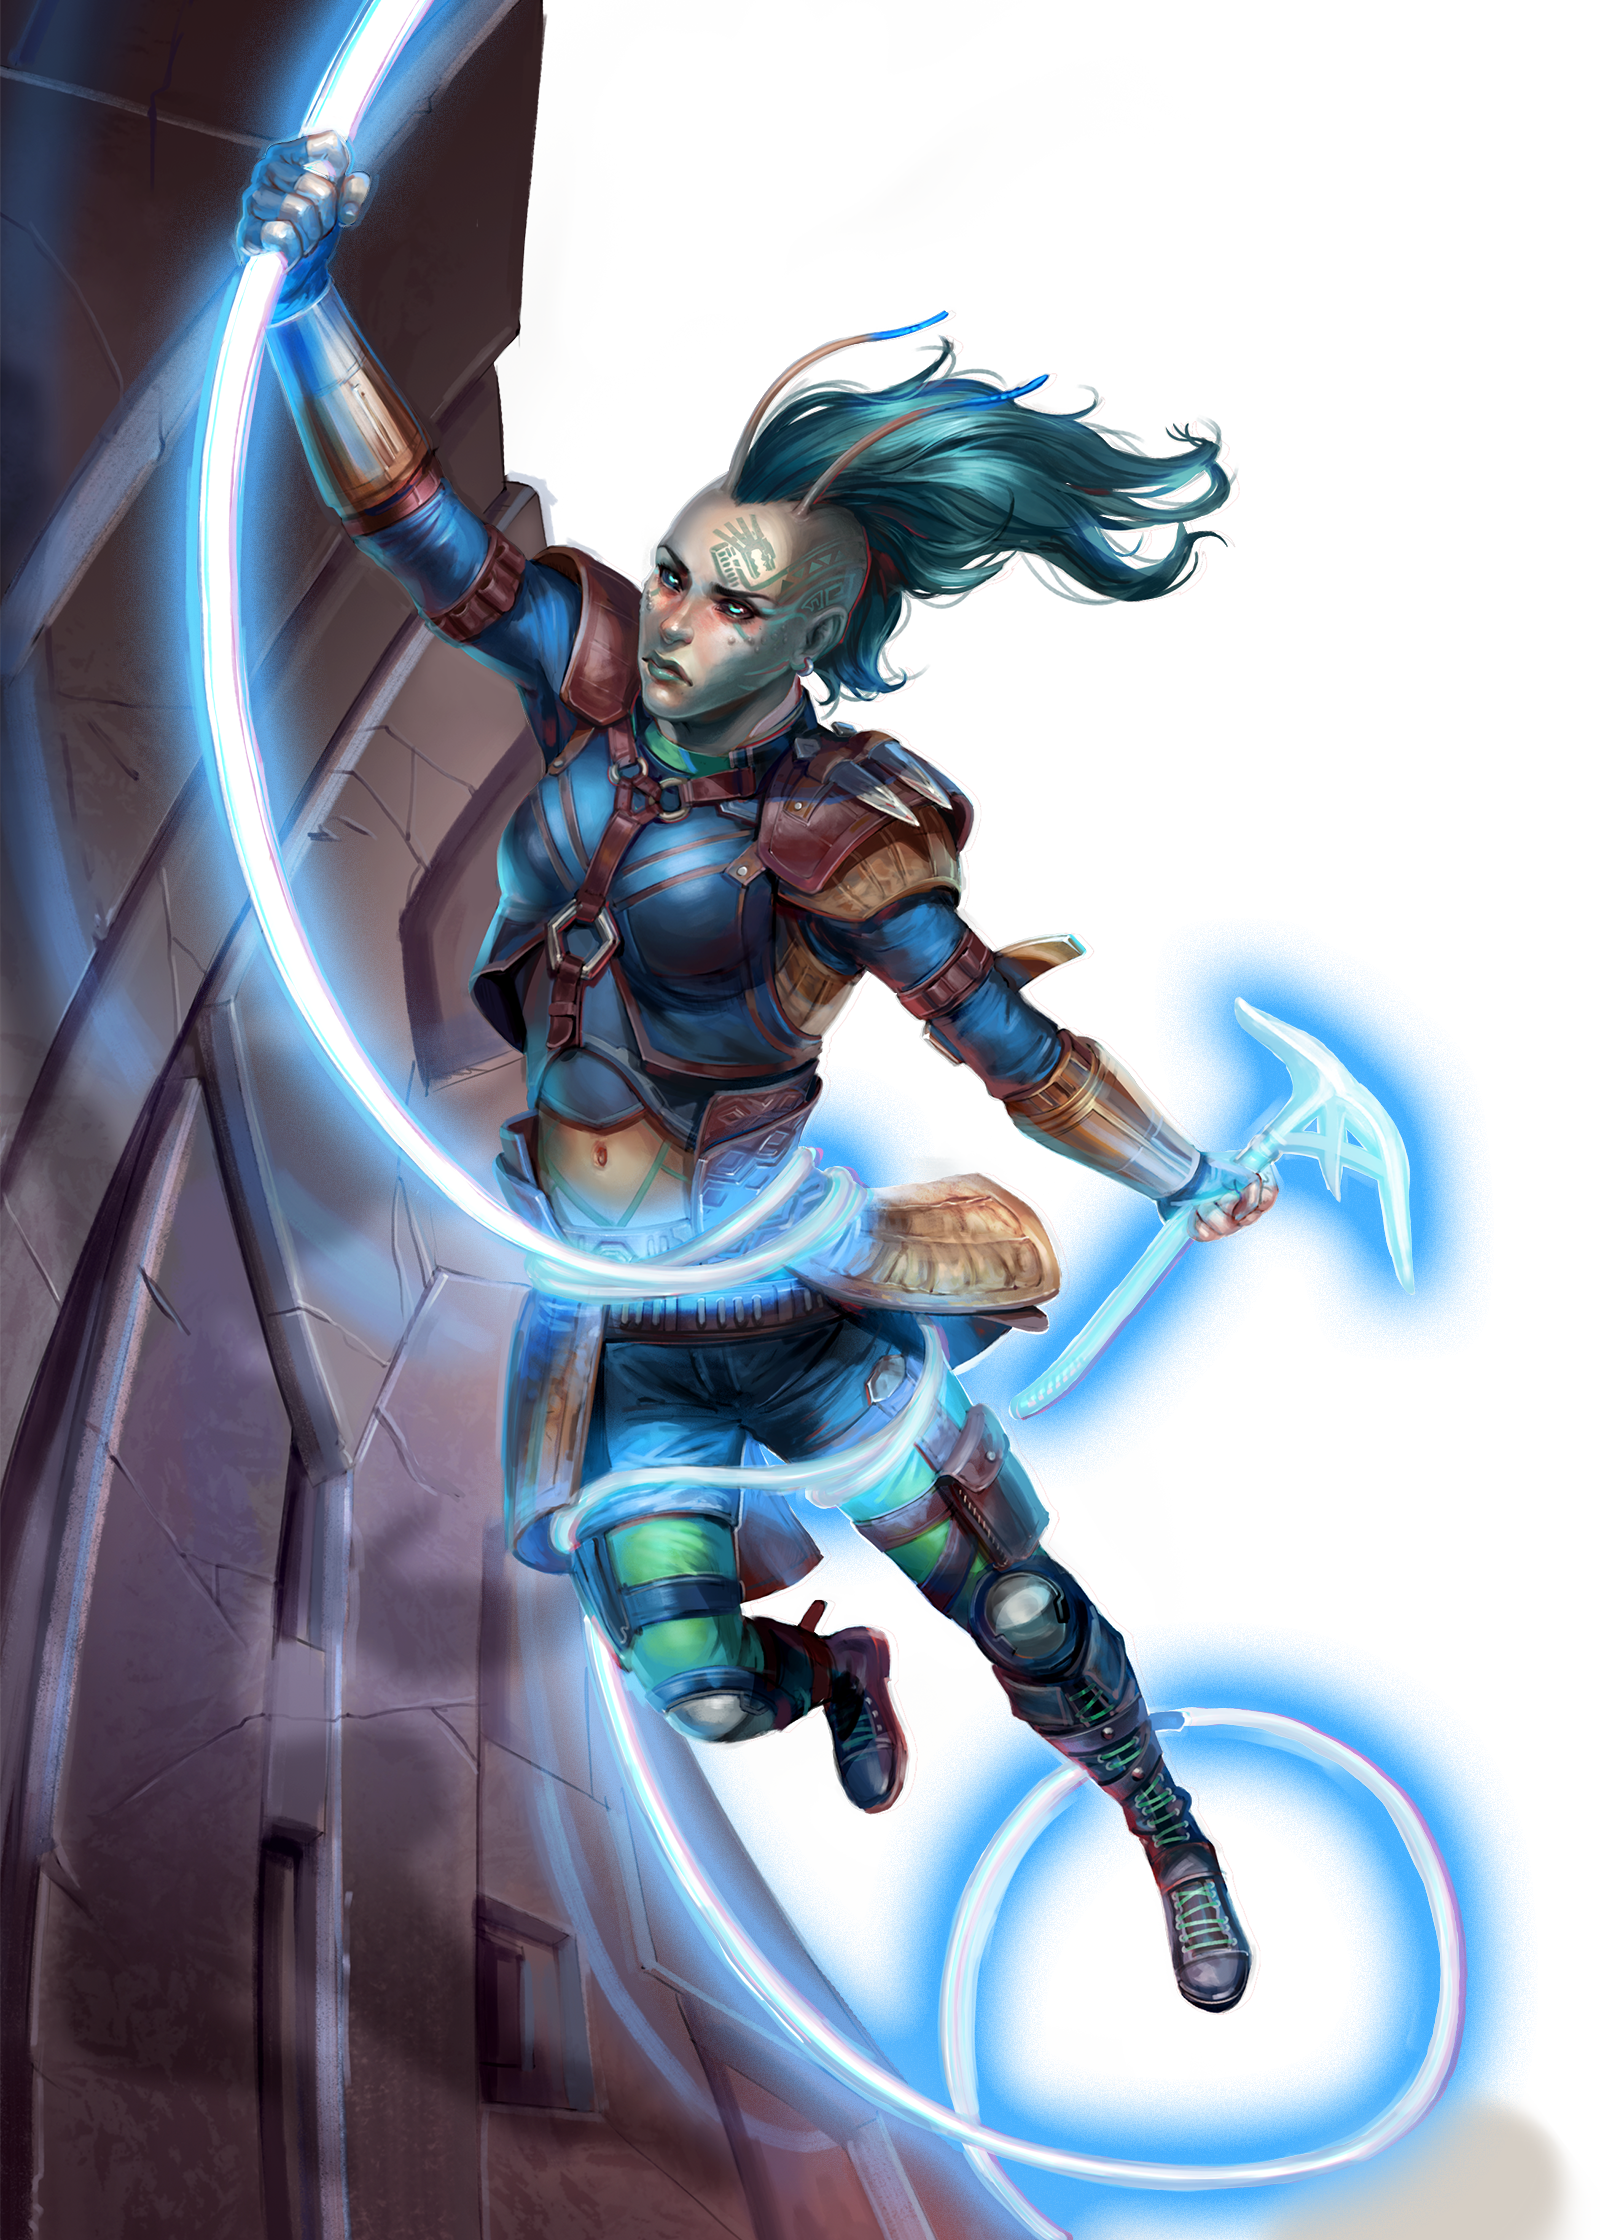 A blue haired Lashunta solarian rappelling down a wall with a glowing blue rope and axe